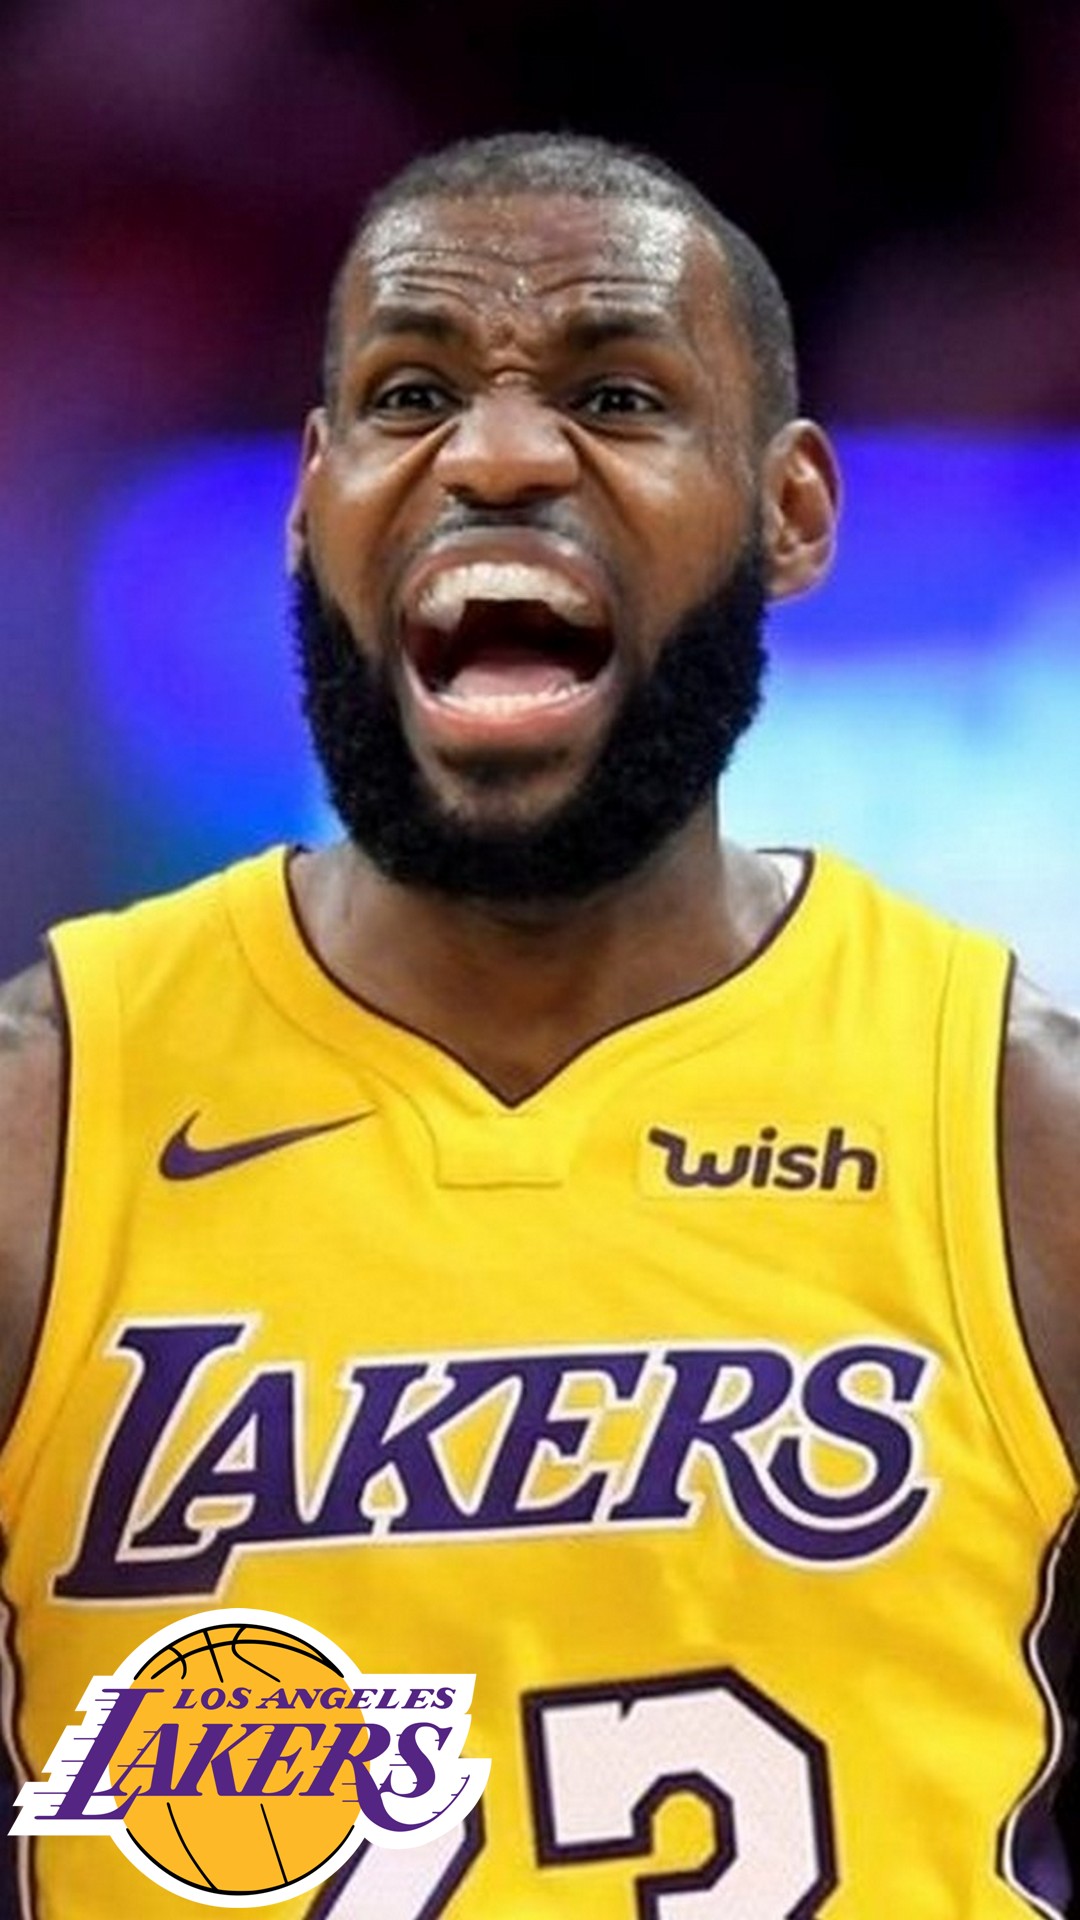 LeBron James Lakers iPhone 8 Wallpaper with image dimensions 1080x1920 pixel. You can make this wallpaper for your Desktop Computer Backgrounds, Windows or Mac Screensavers, iPhone Lock screen, Tablet or Android and another Mobile Phone device